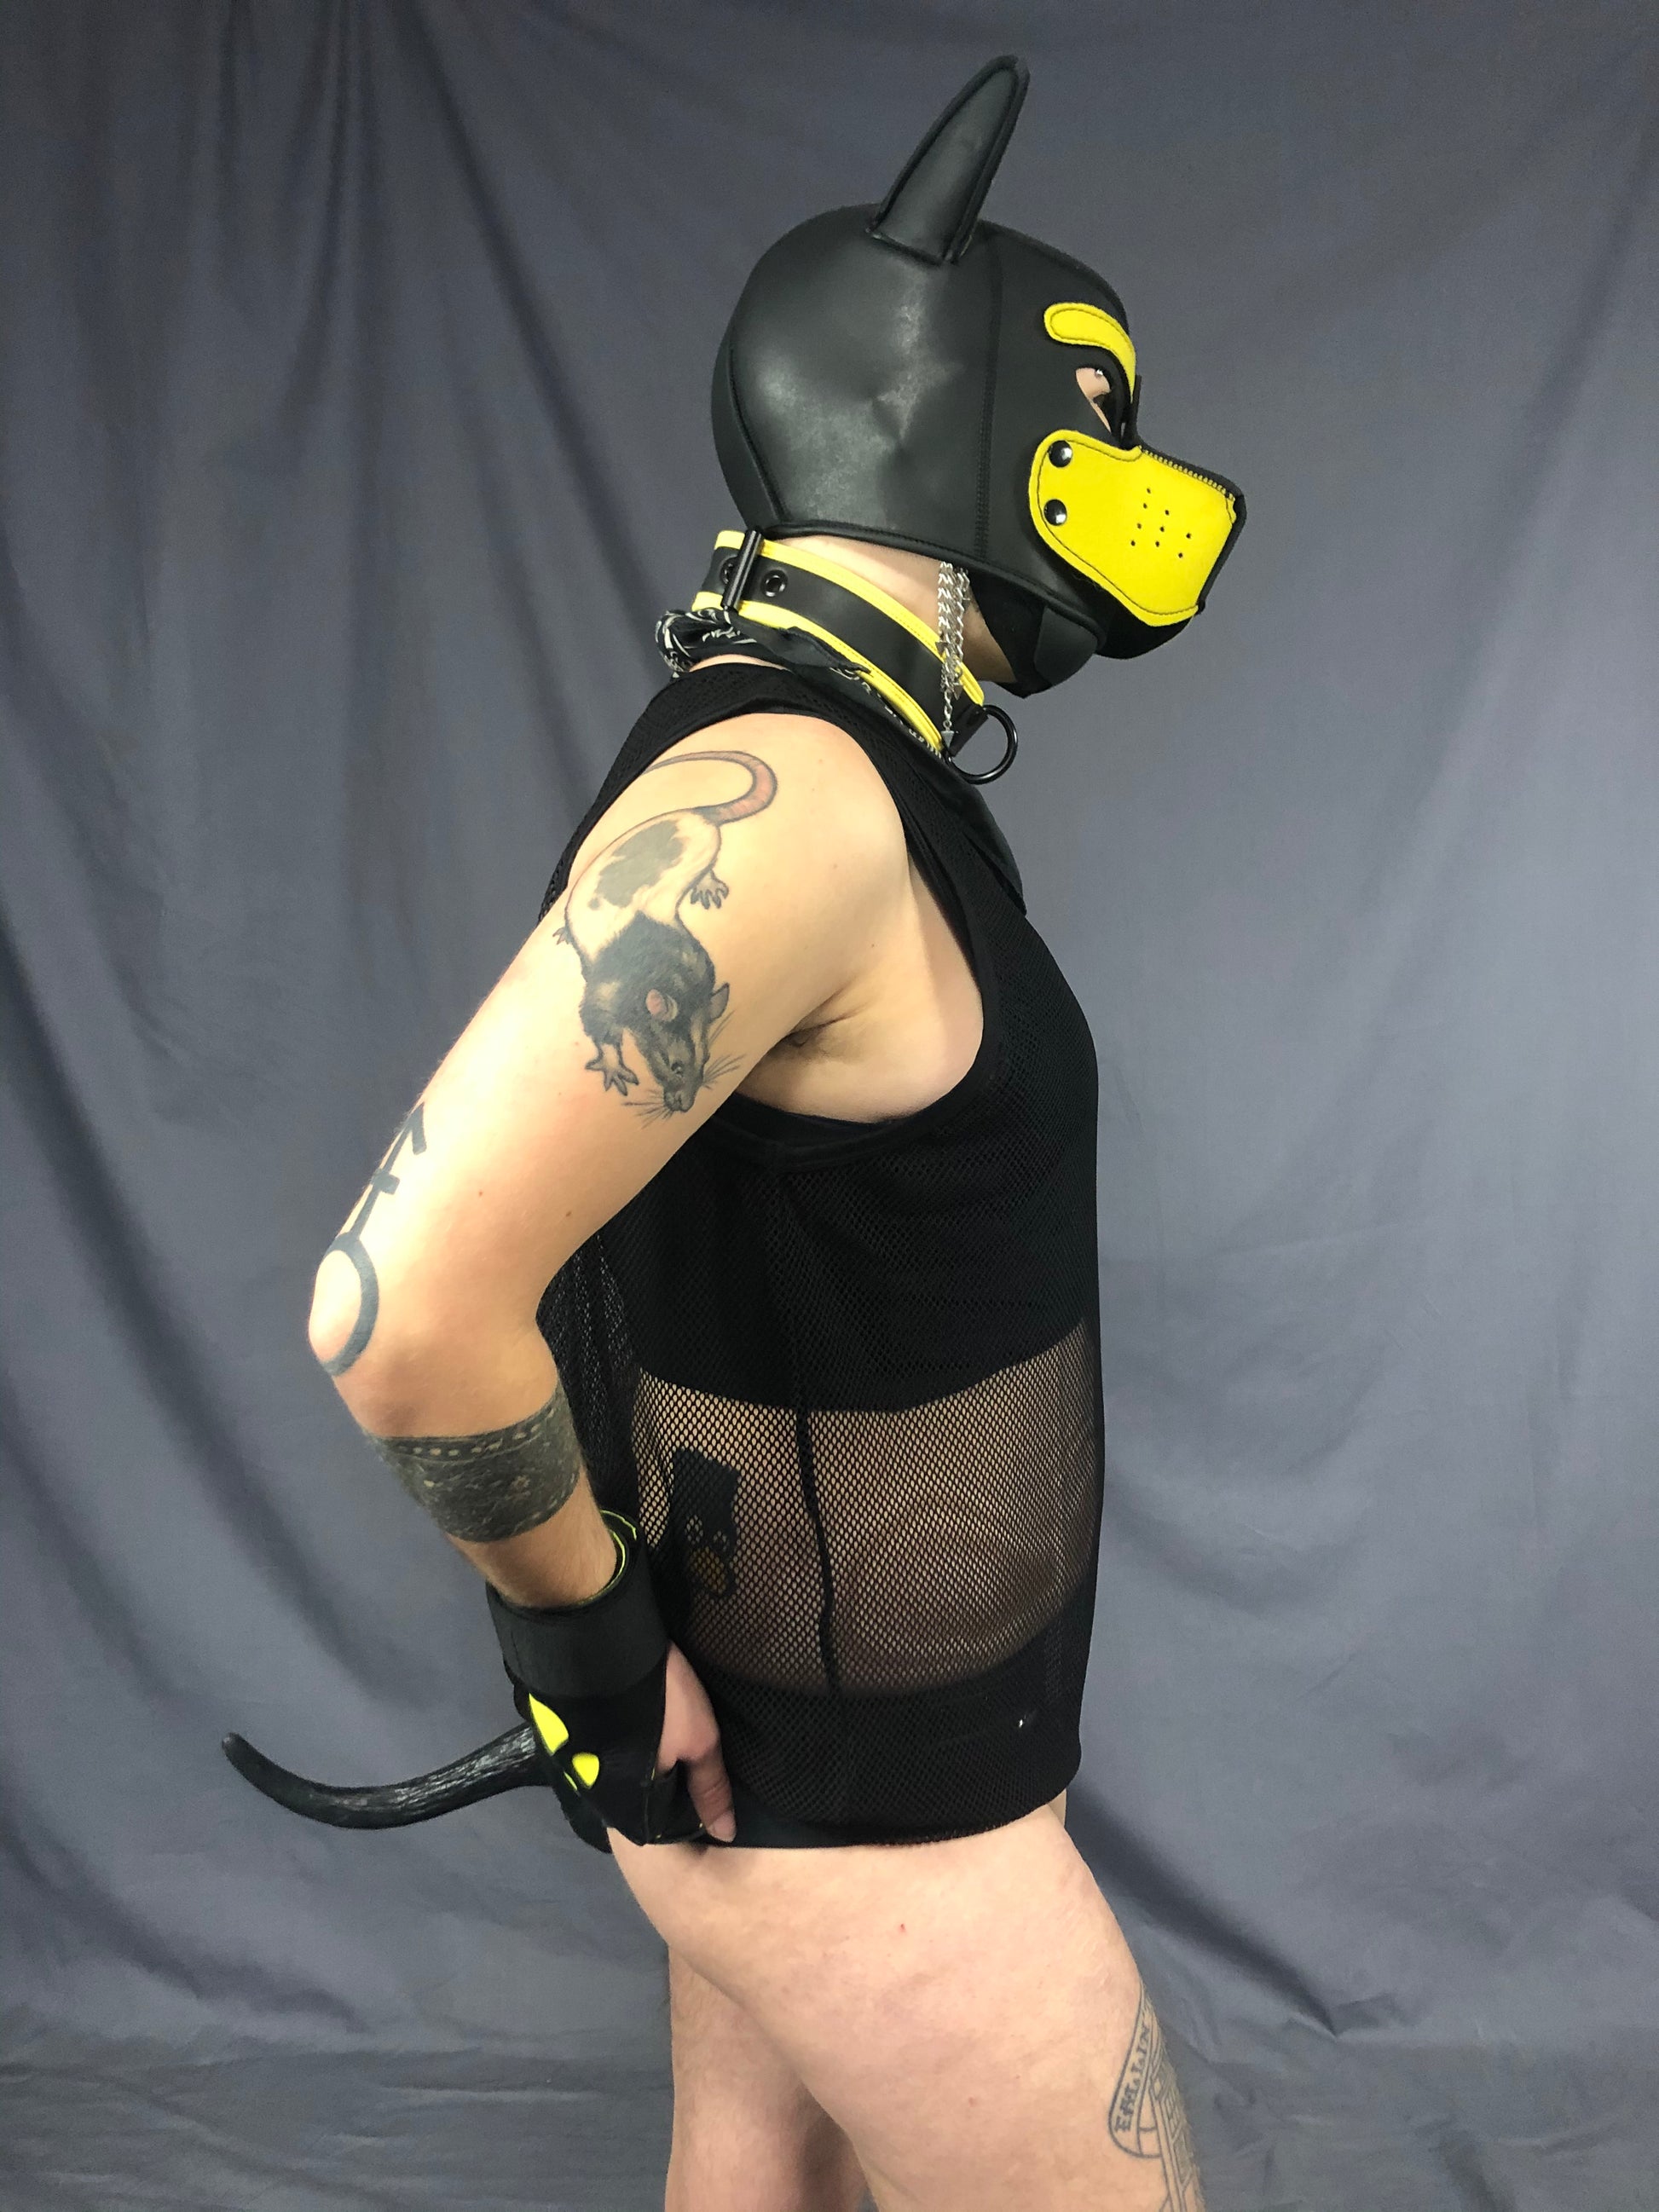 right side view of silicone strap on puppy tail being worn